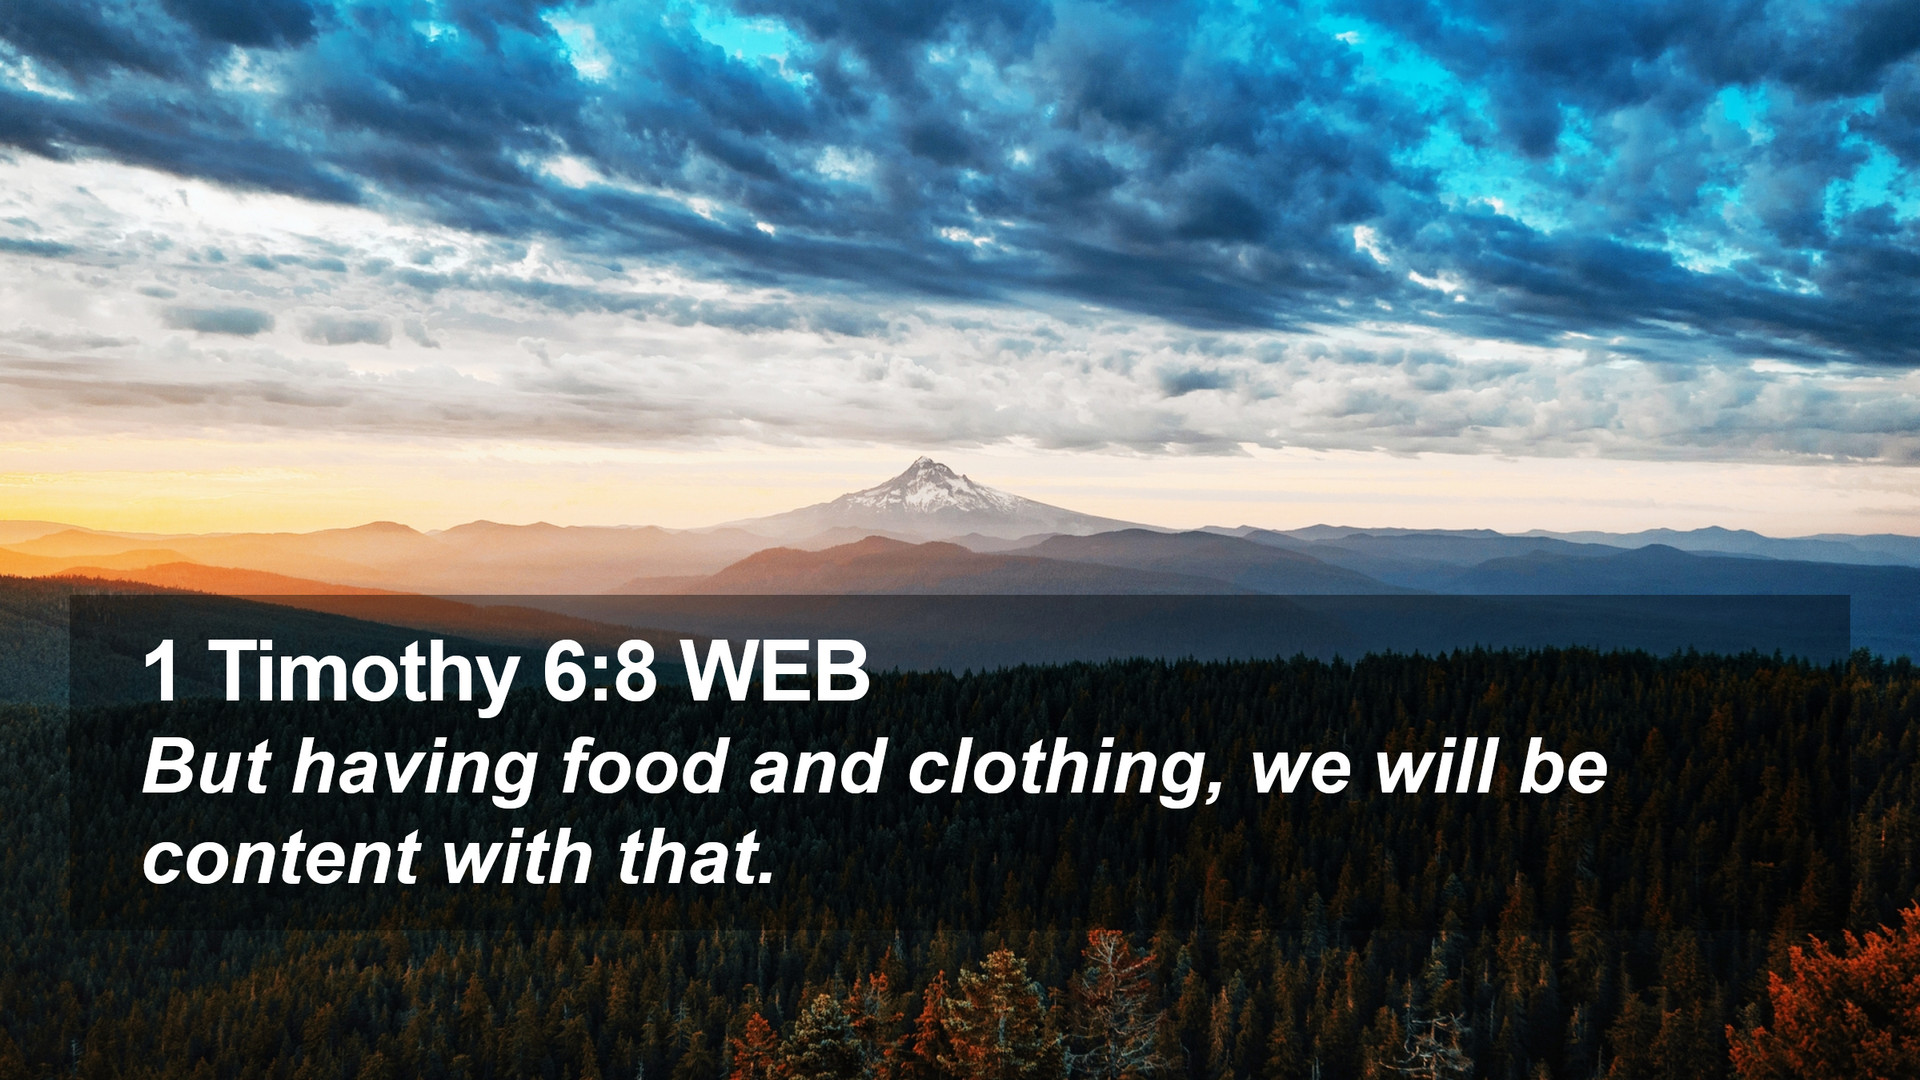 Timothy 6:8 WEB Desktop Wallpaper having food and clothing, we will be content